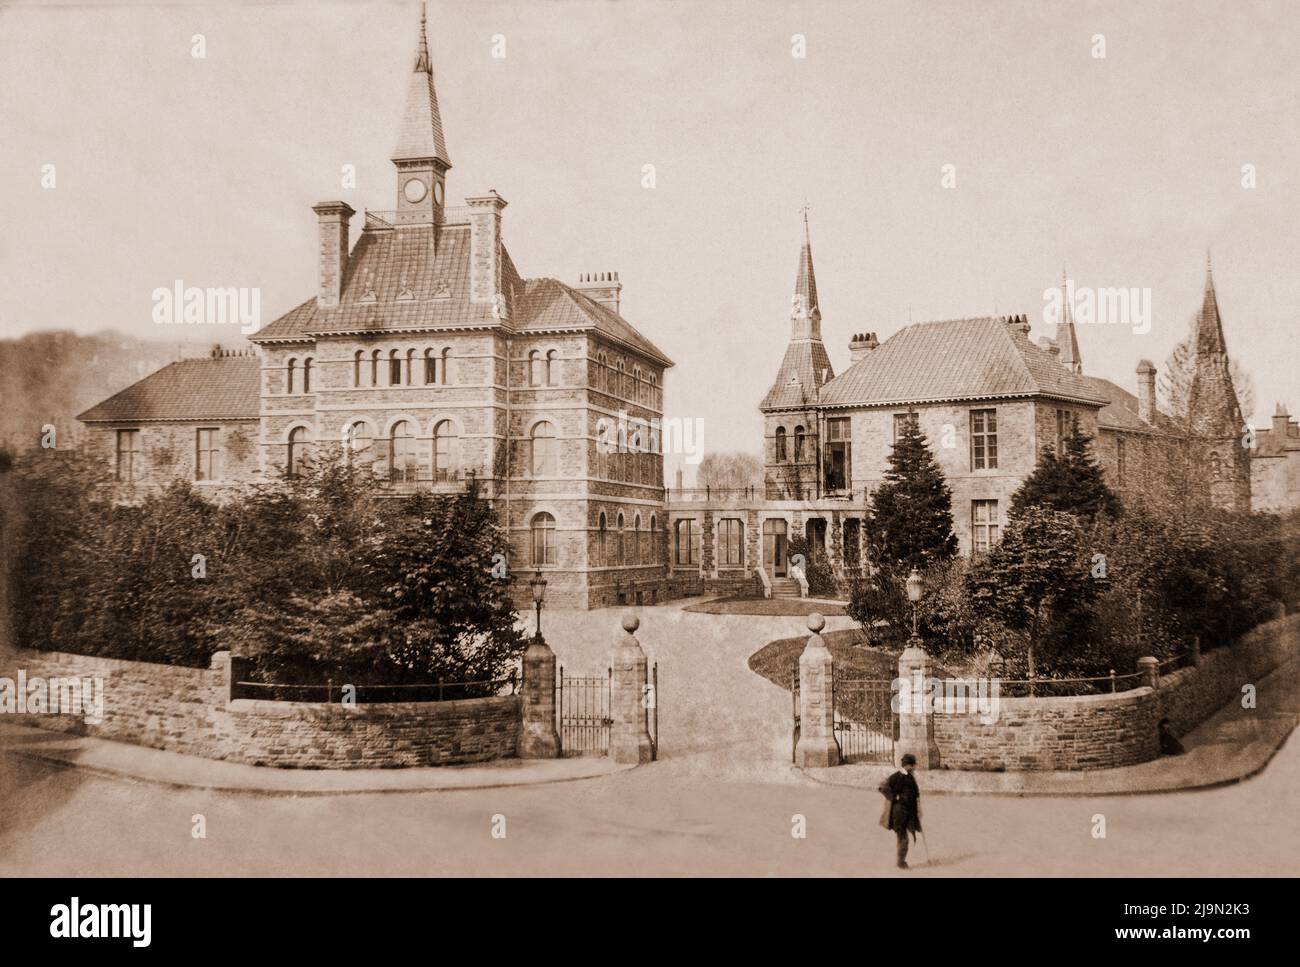 Swansea General and Eye Hospital, St Helen's Road, Swansea, Wasles, Royaume-Uni vers 1885 Banque D'Images